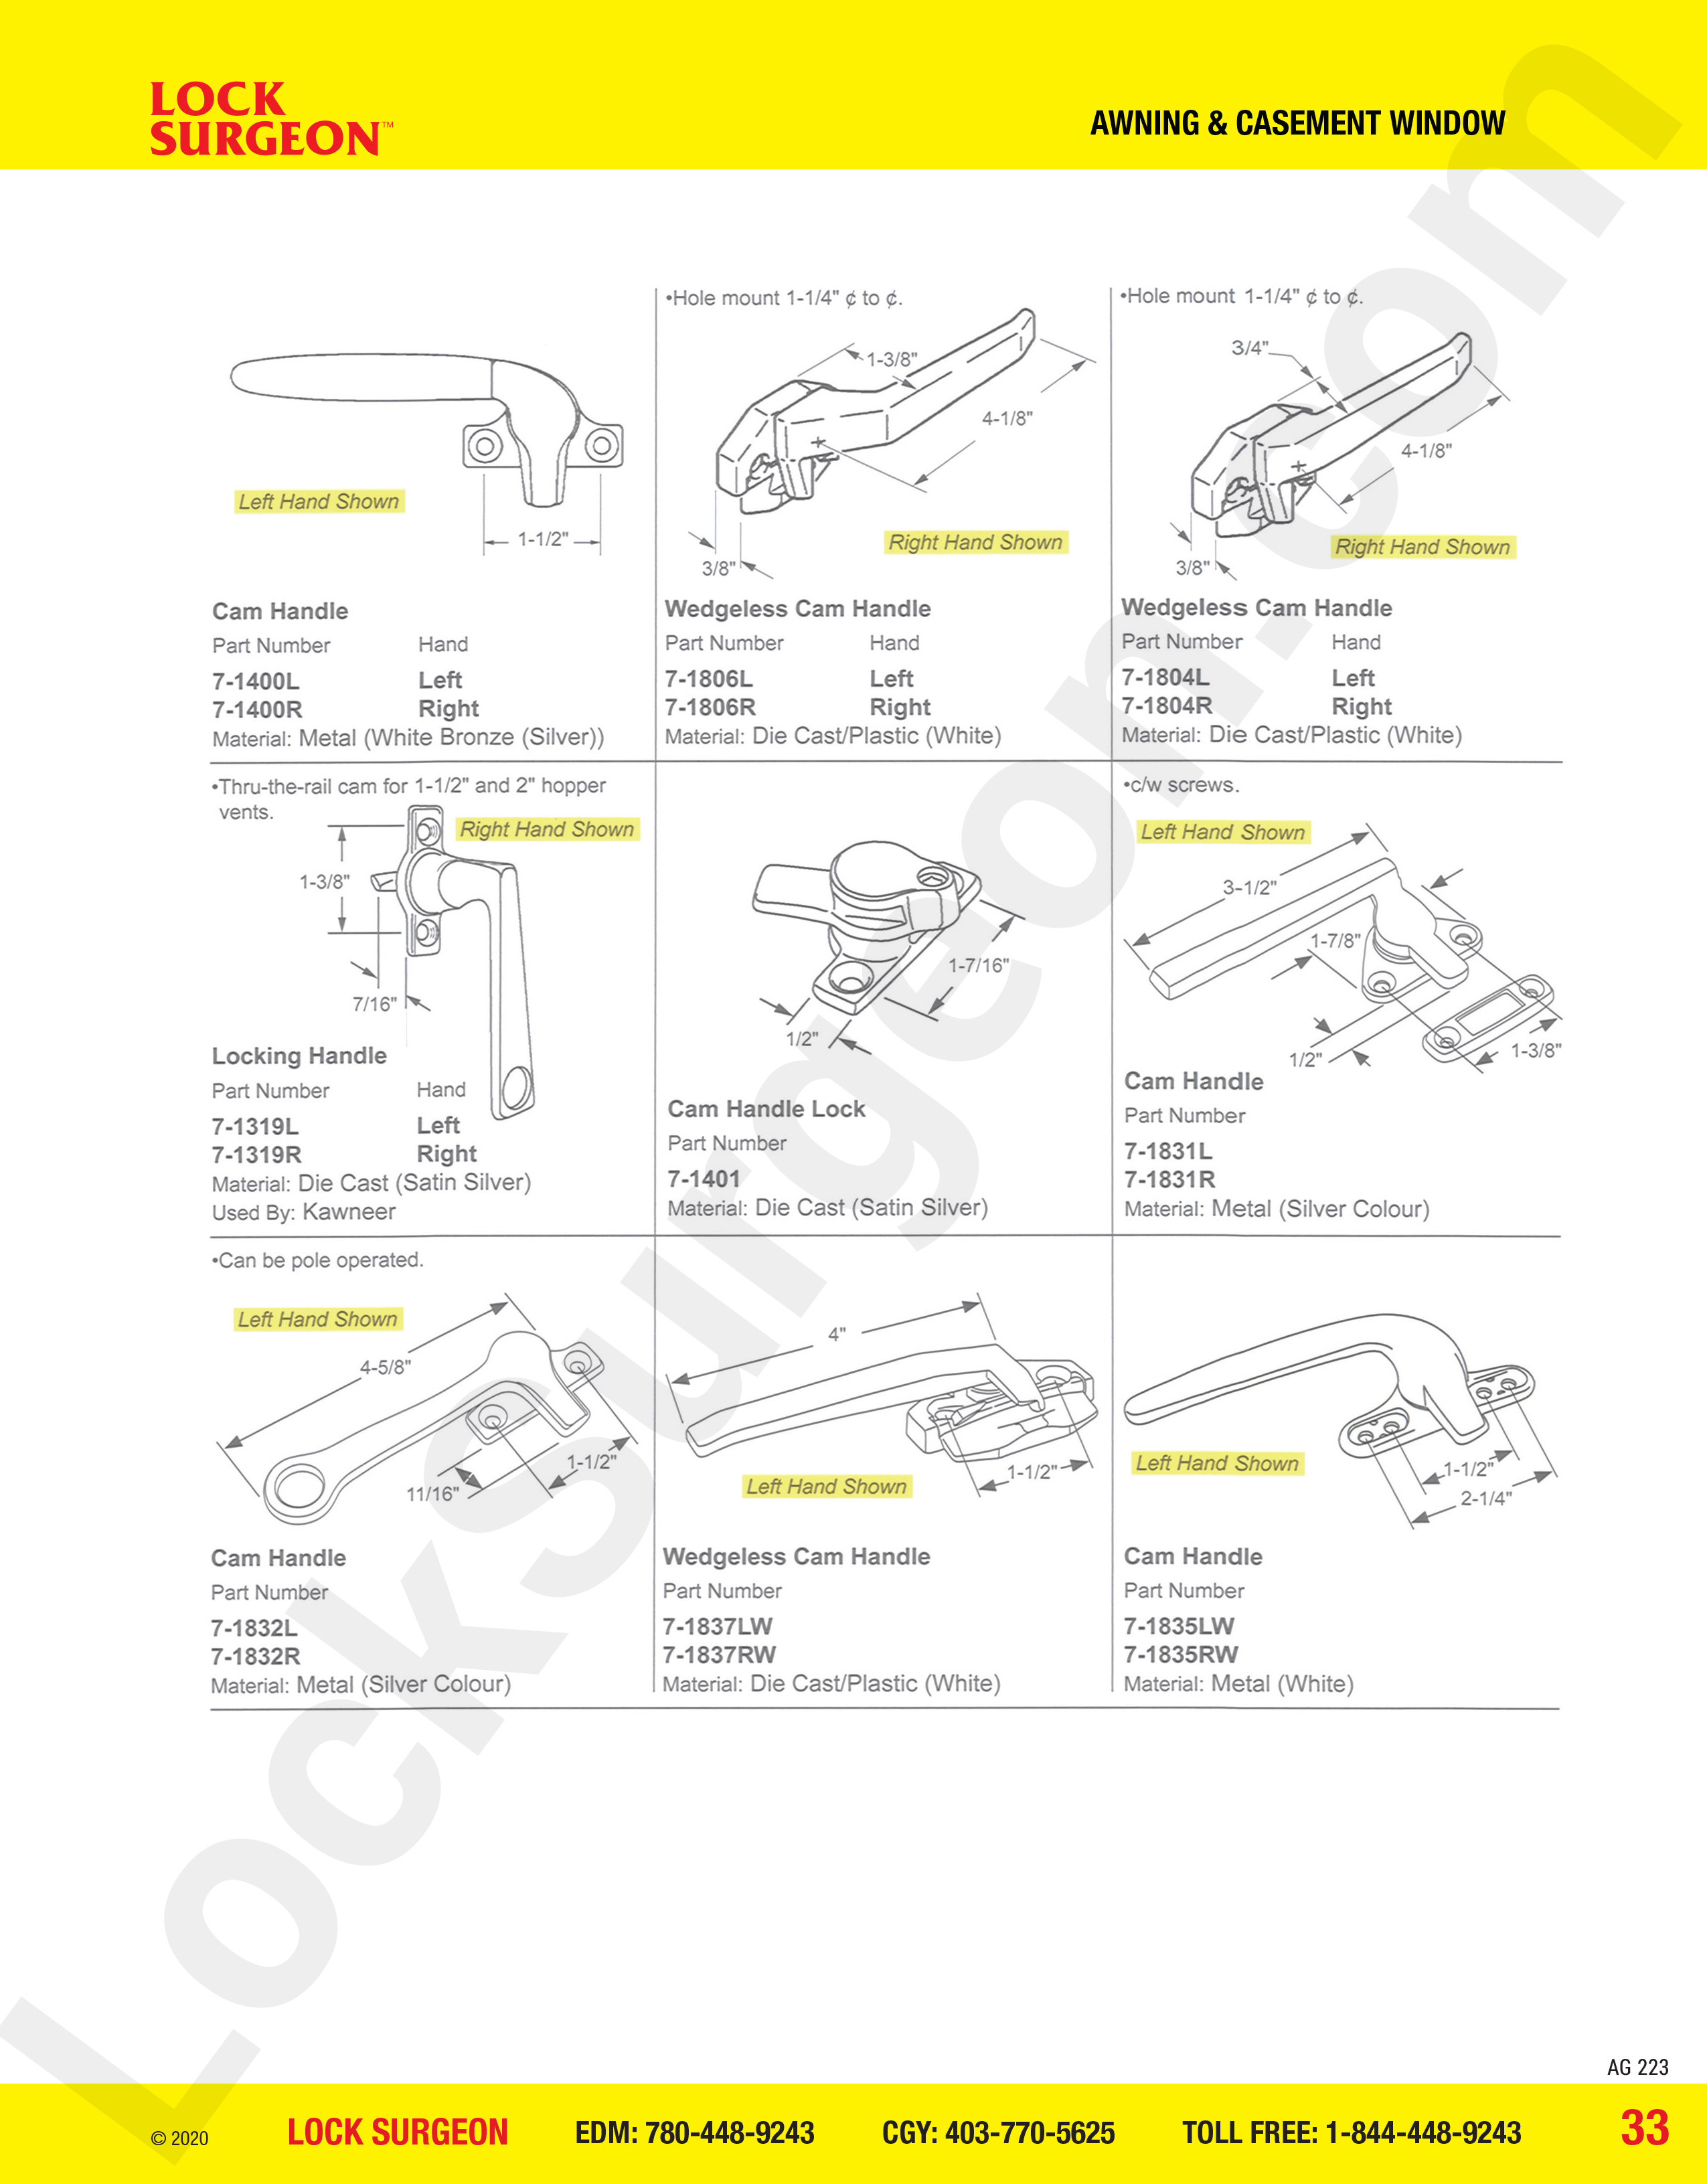 awning and casement window parts for cam handles and locks